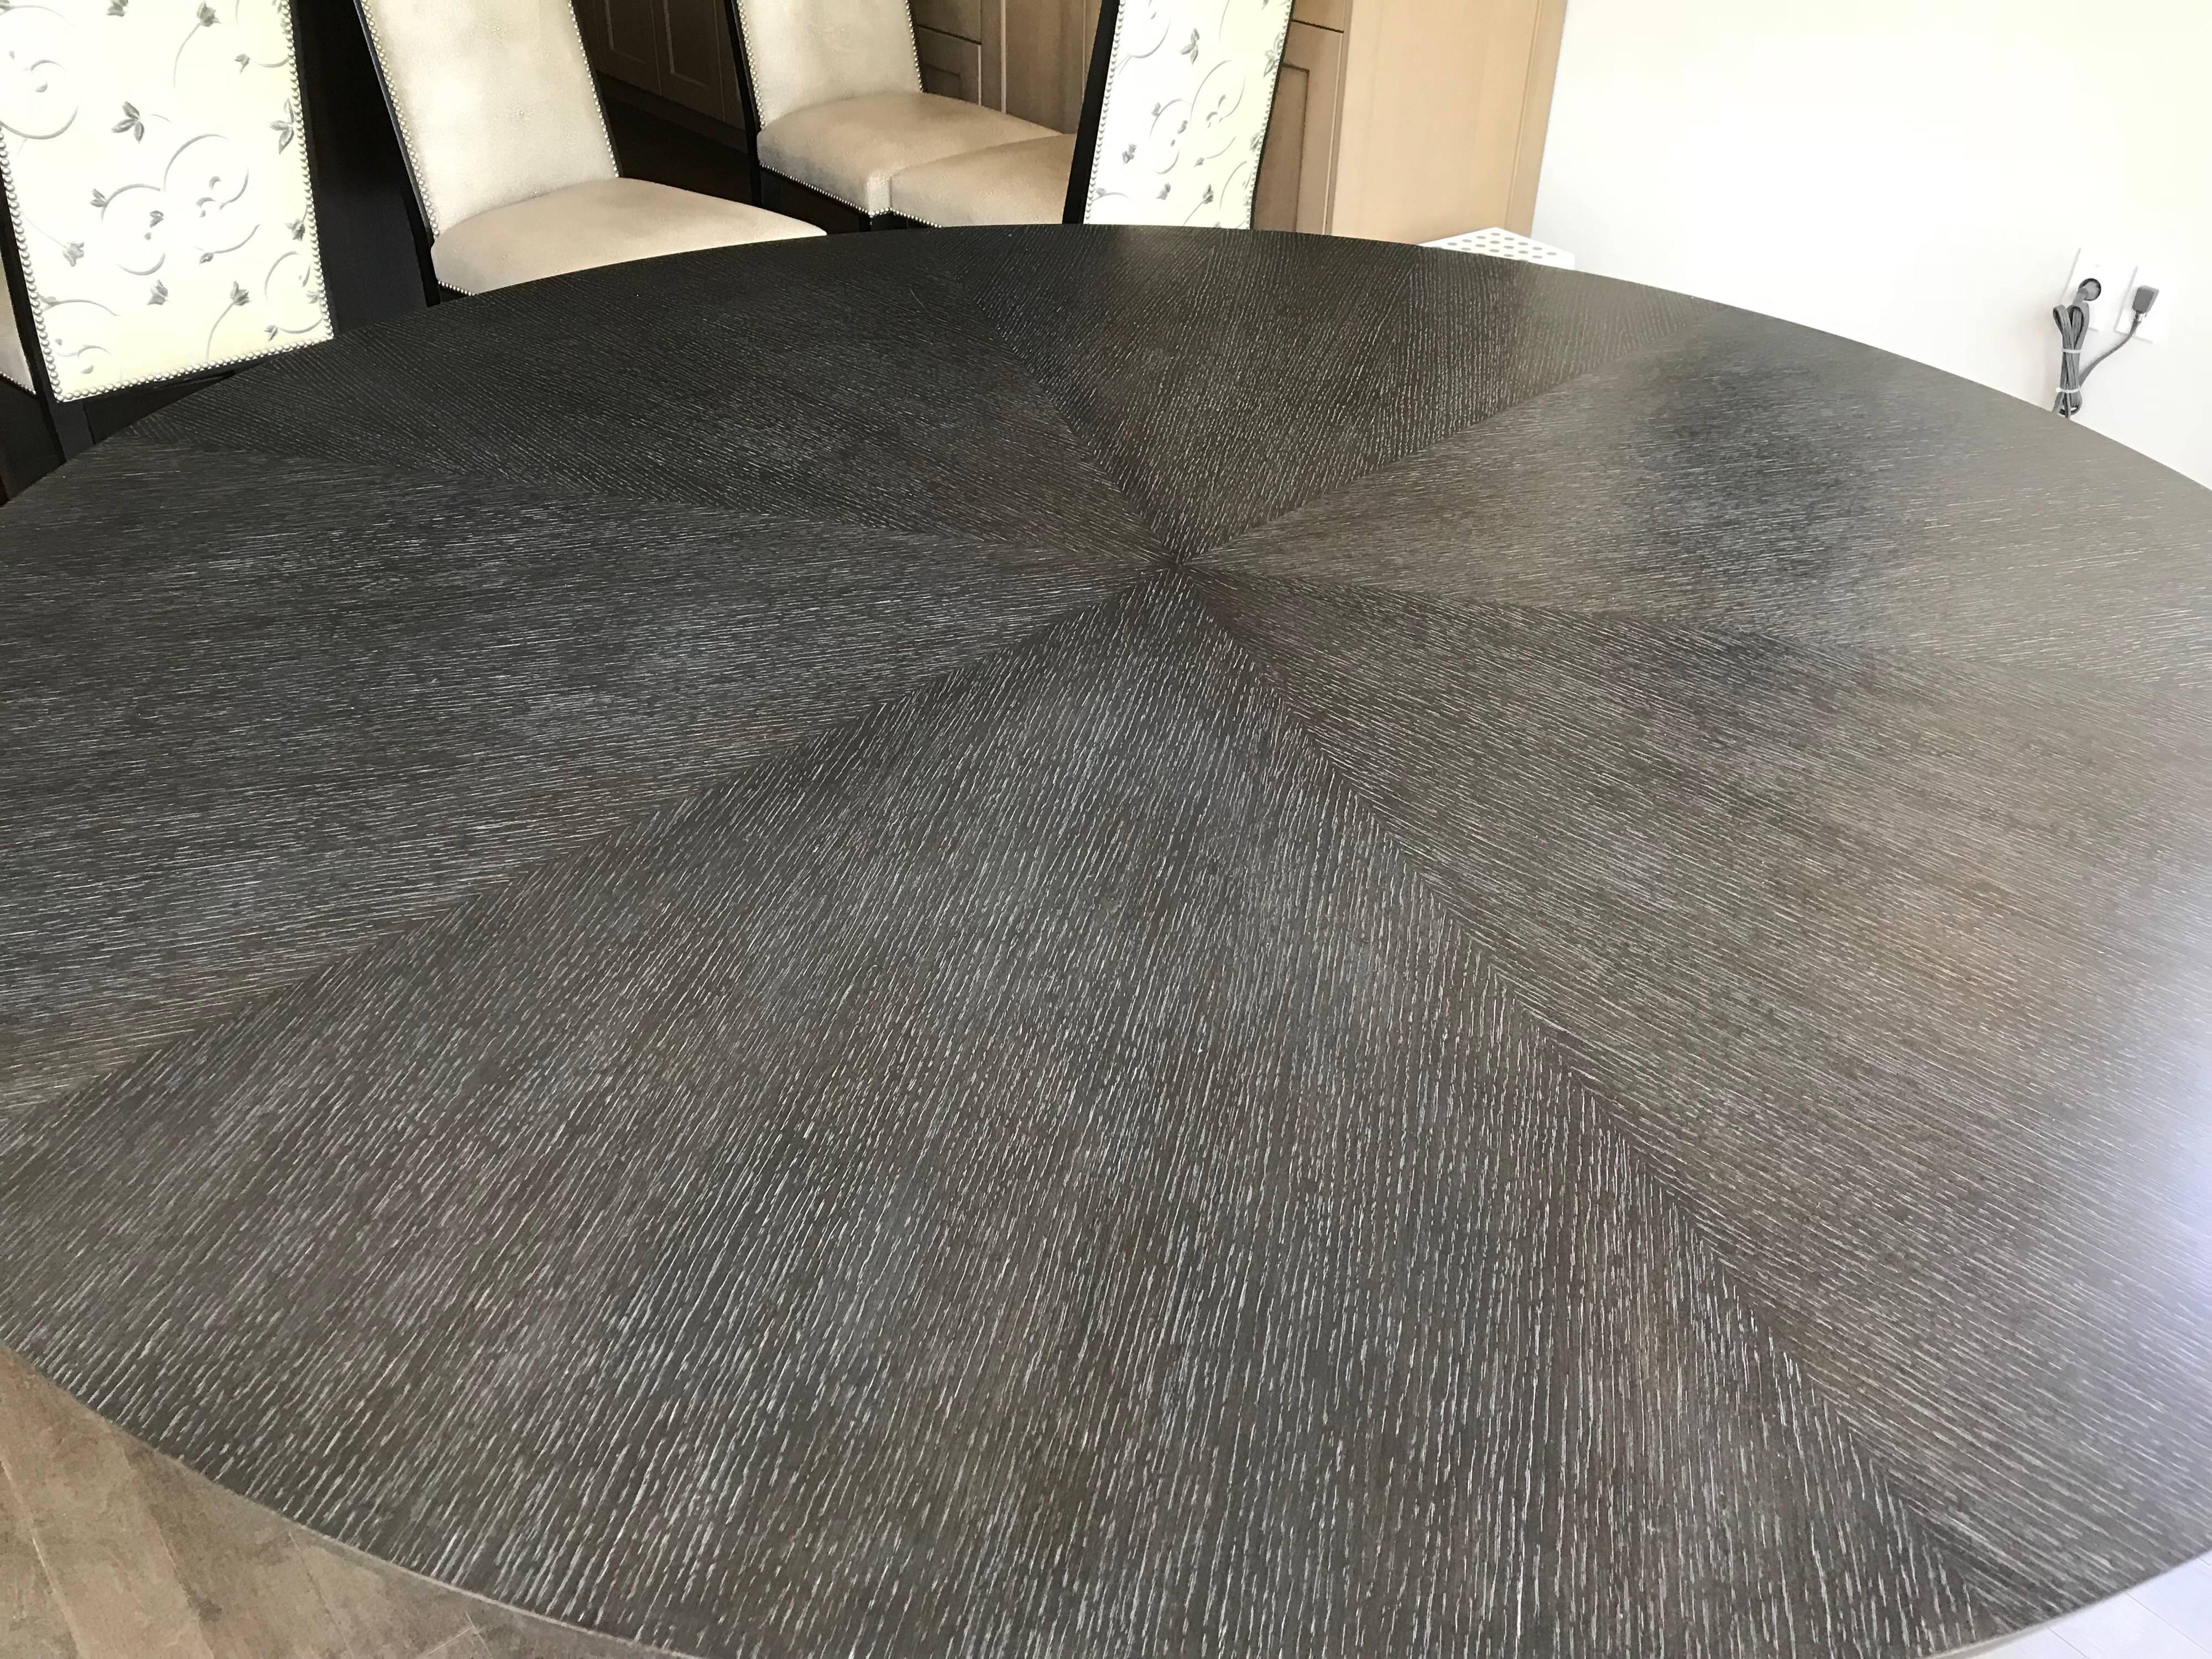 Beautiful 72 inch diameter custom-made dining table made of grey stained rift cut oak. Three columns support the perfectly bookmatched pie shape top. Included in the purchase is a 36